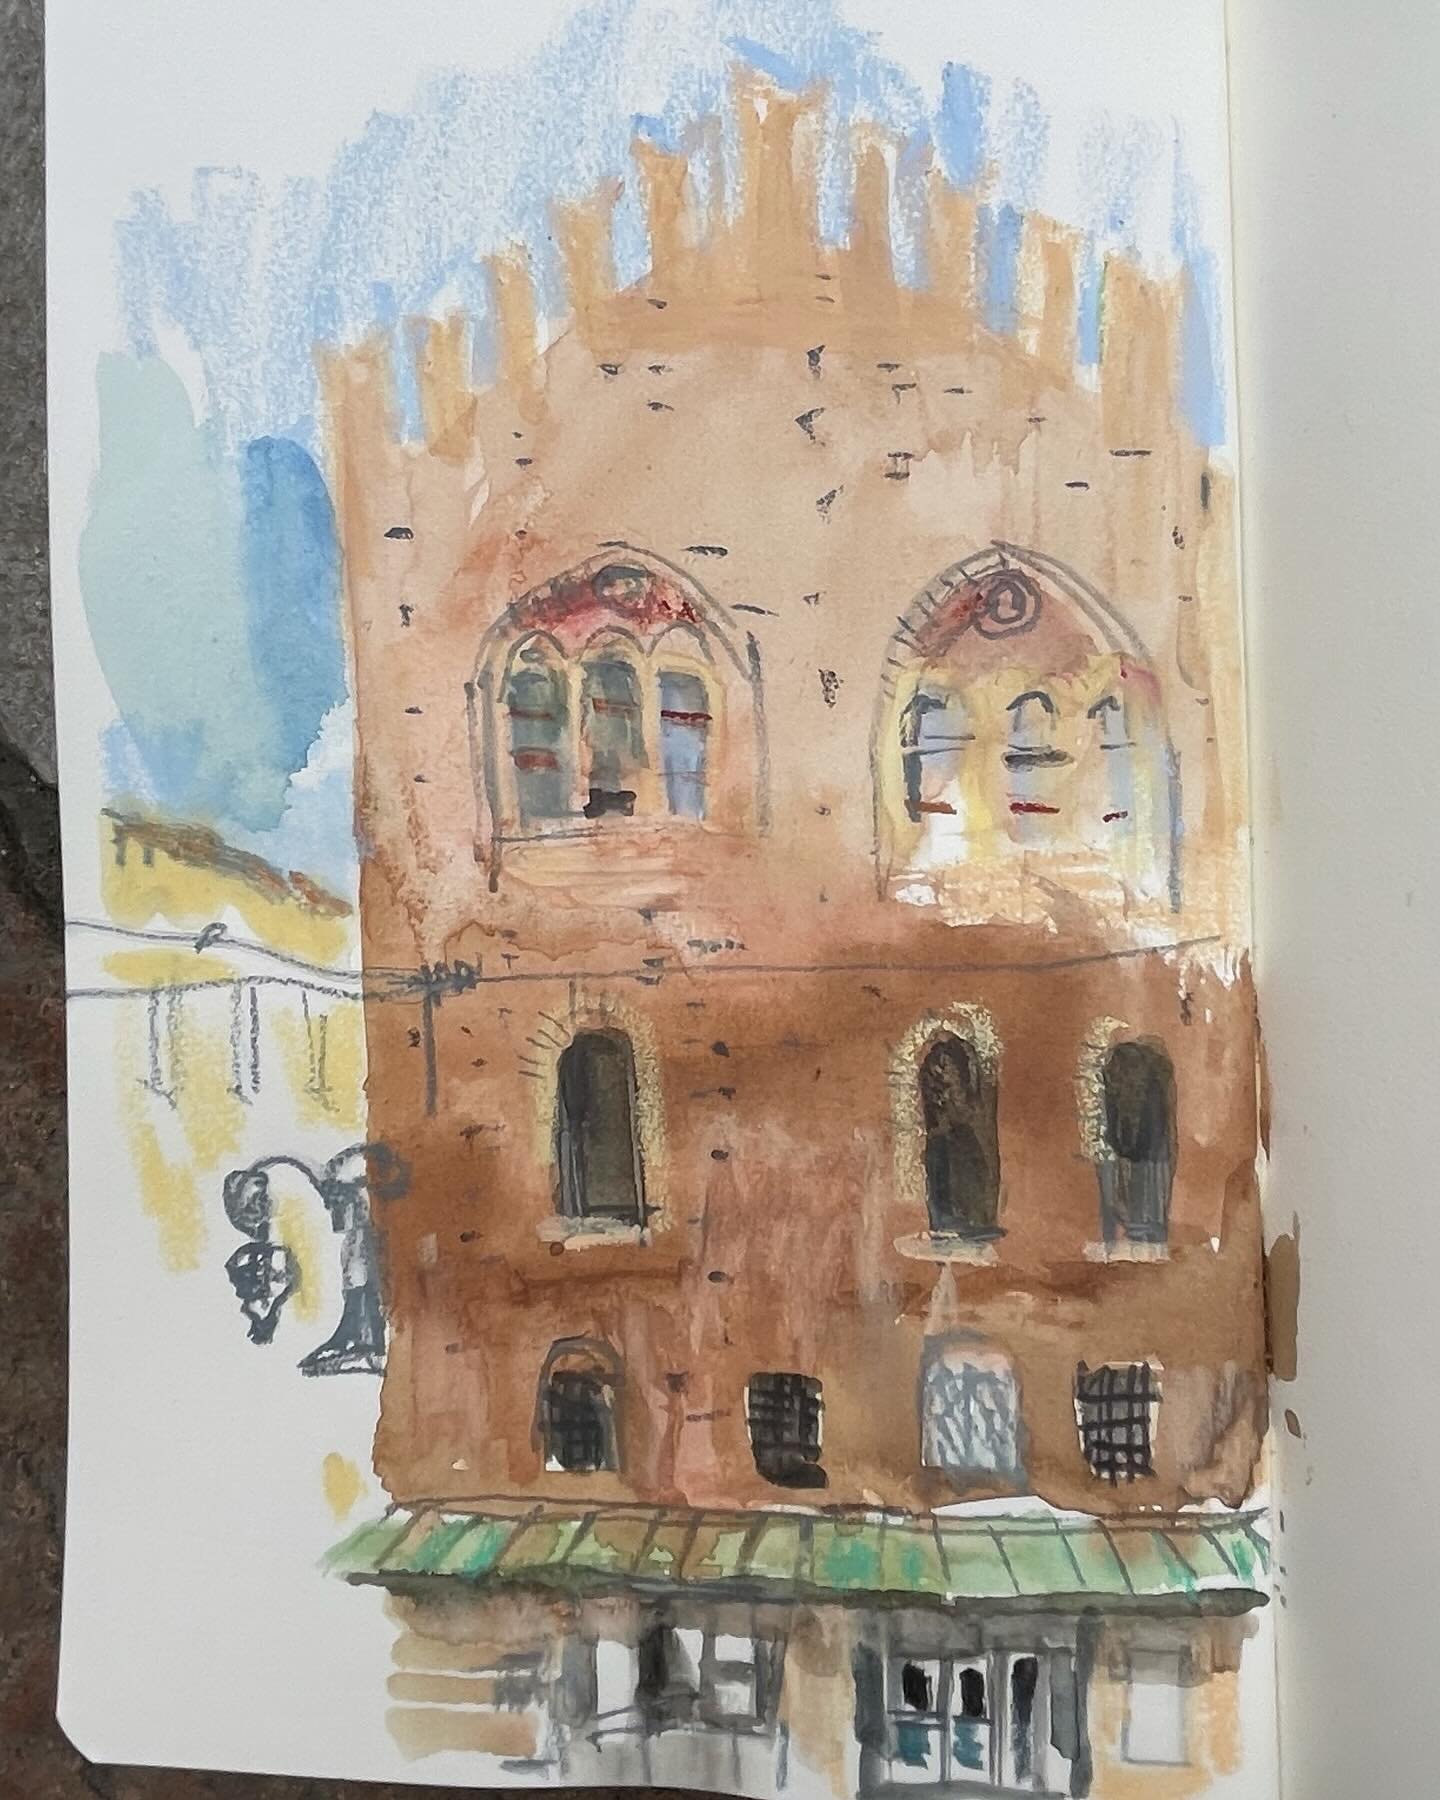 Today post: Bologna facade. Went out to find some lovely places to draw and I stumbled on some lovely fellow artist from @cambridge_school_of_art . Such kind and talented folks, we hung out at the bar and drew together too. This is what travel is abo